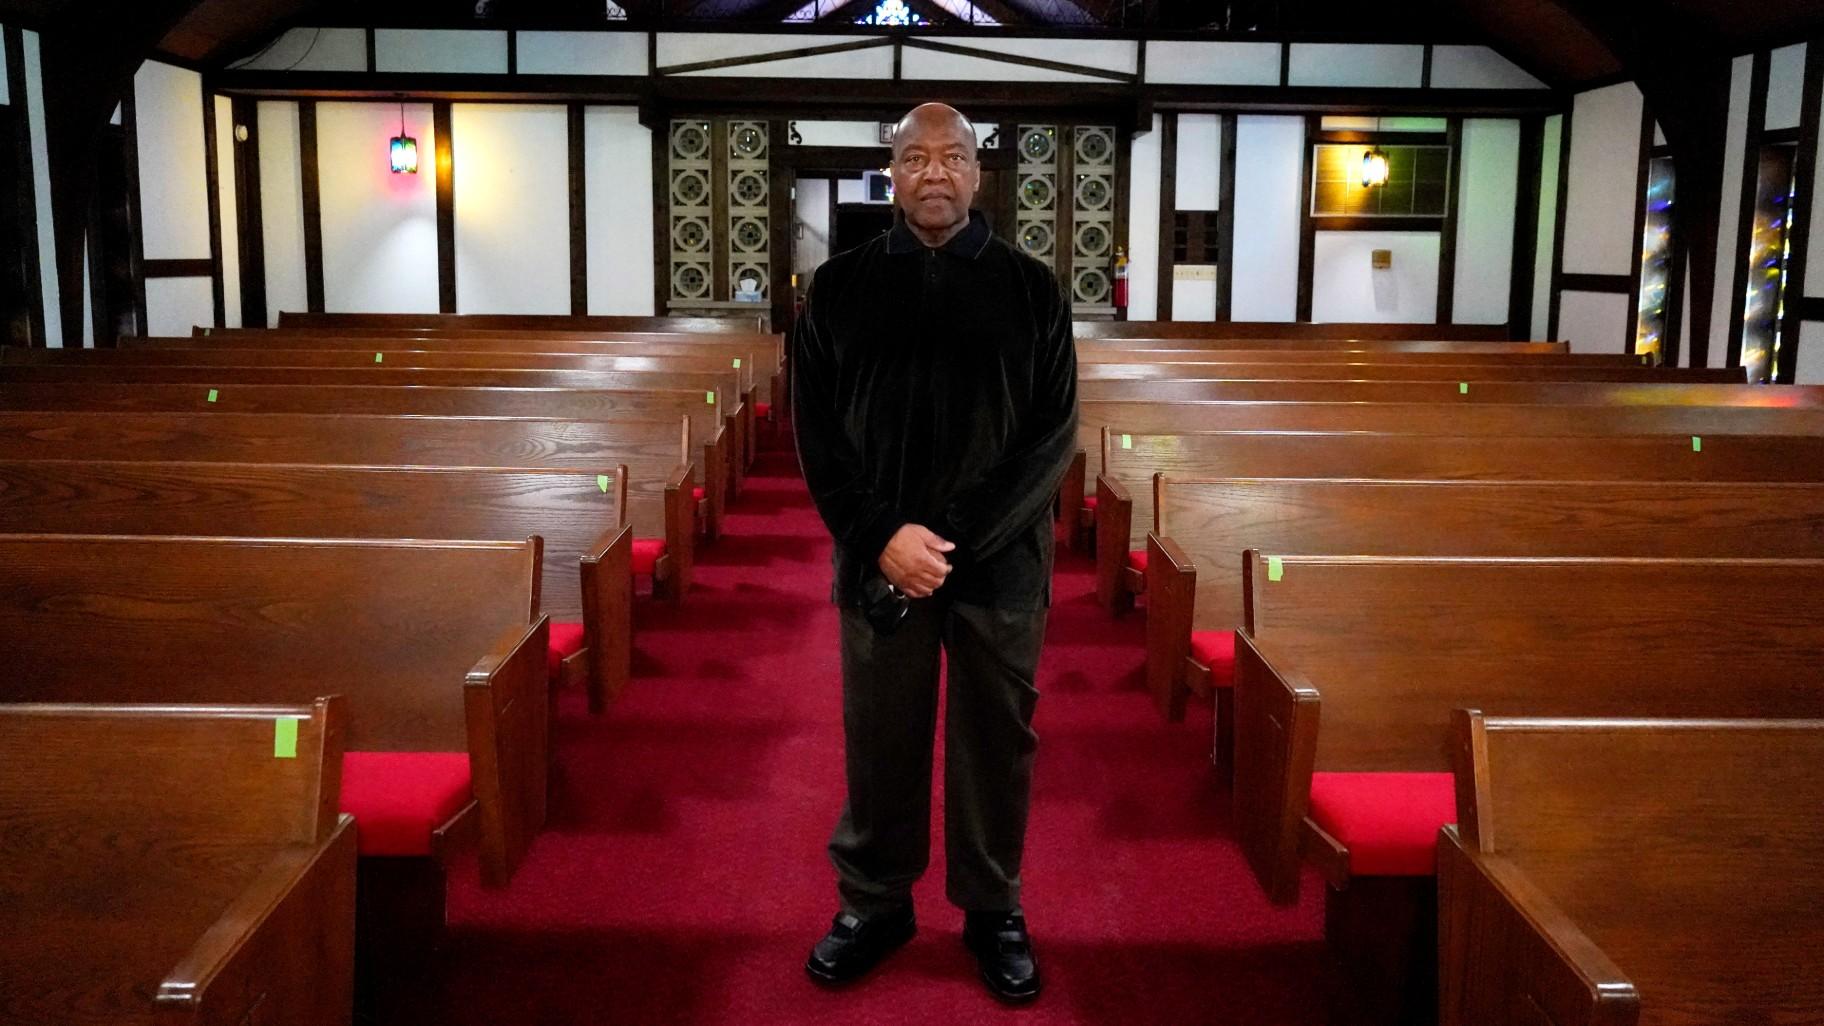 Rev. David Bigsby poses for a photo at his church in Lansing, Ill., Tuesday, Jan. 20, 2022. He moved to Lansing, Ill., 6 years ago, his predominantly Black church has grown in that time by at least 20%. (AP Photo / Nam Y. Huh)